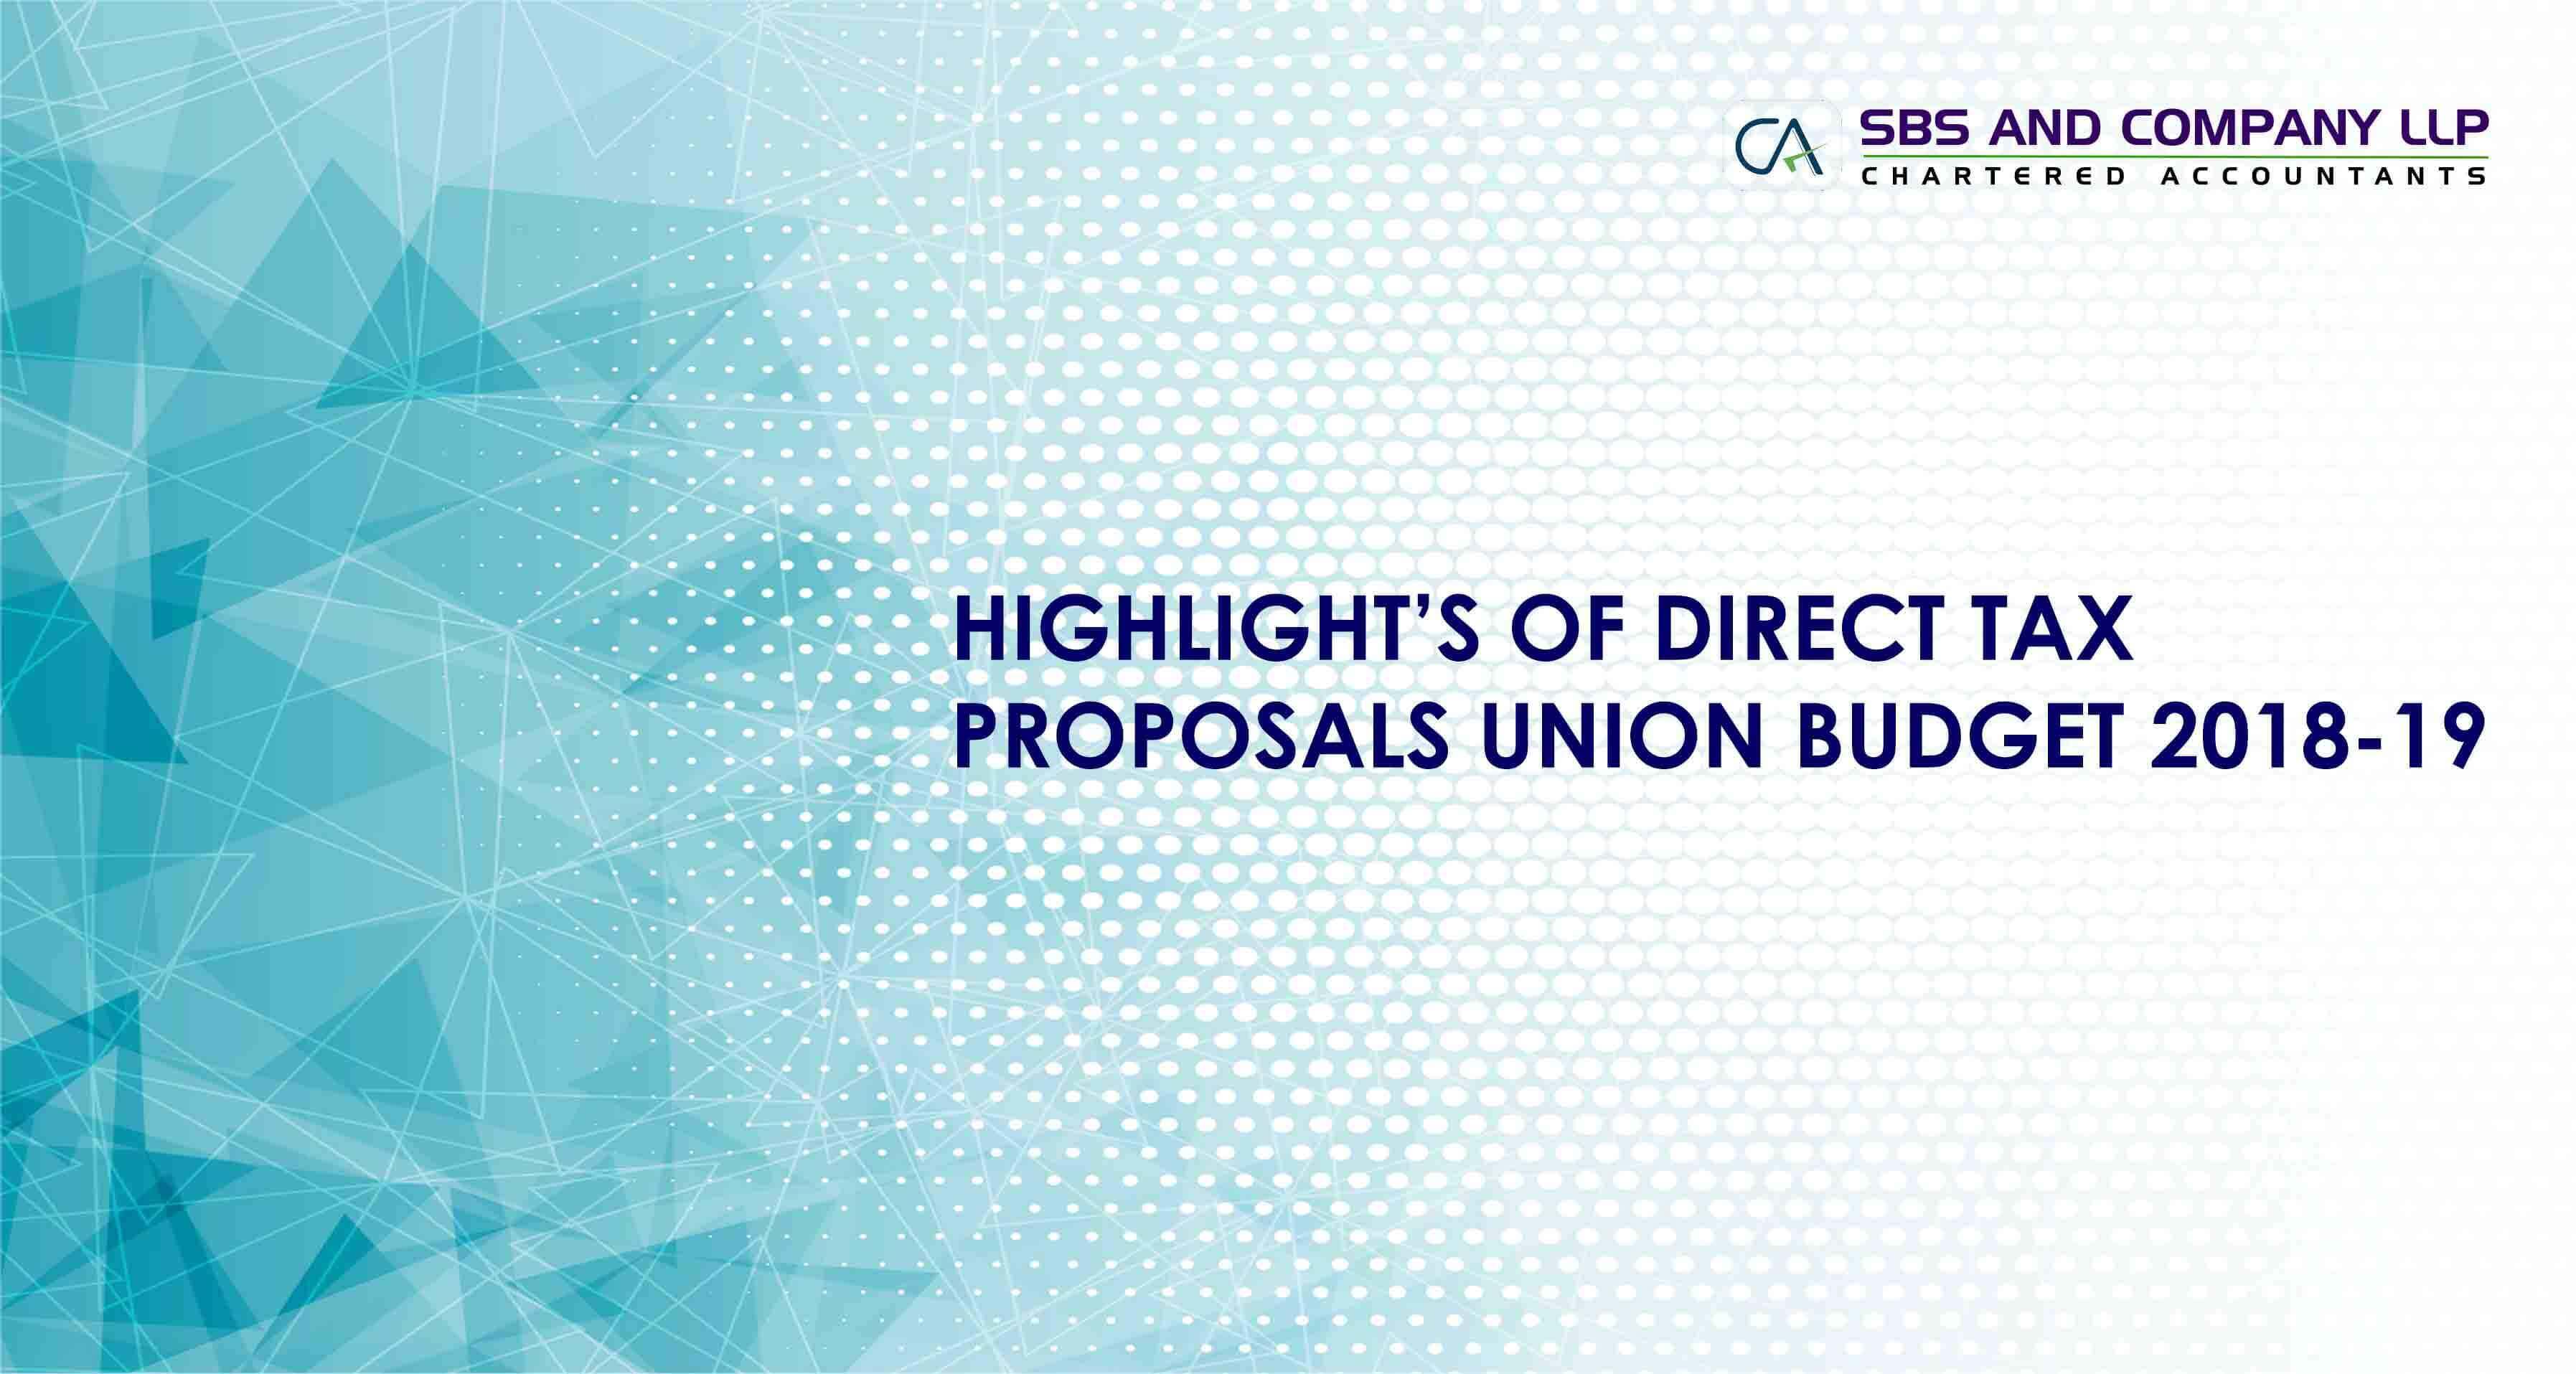 HIGHLIGHT’S OF DIRECT TAX PROPOSALS IN UNION BUDGET 2018-19